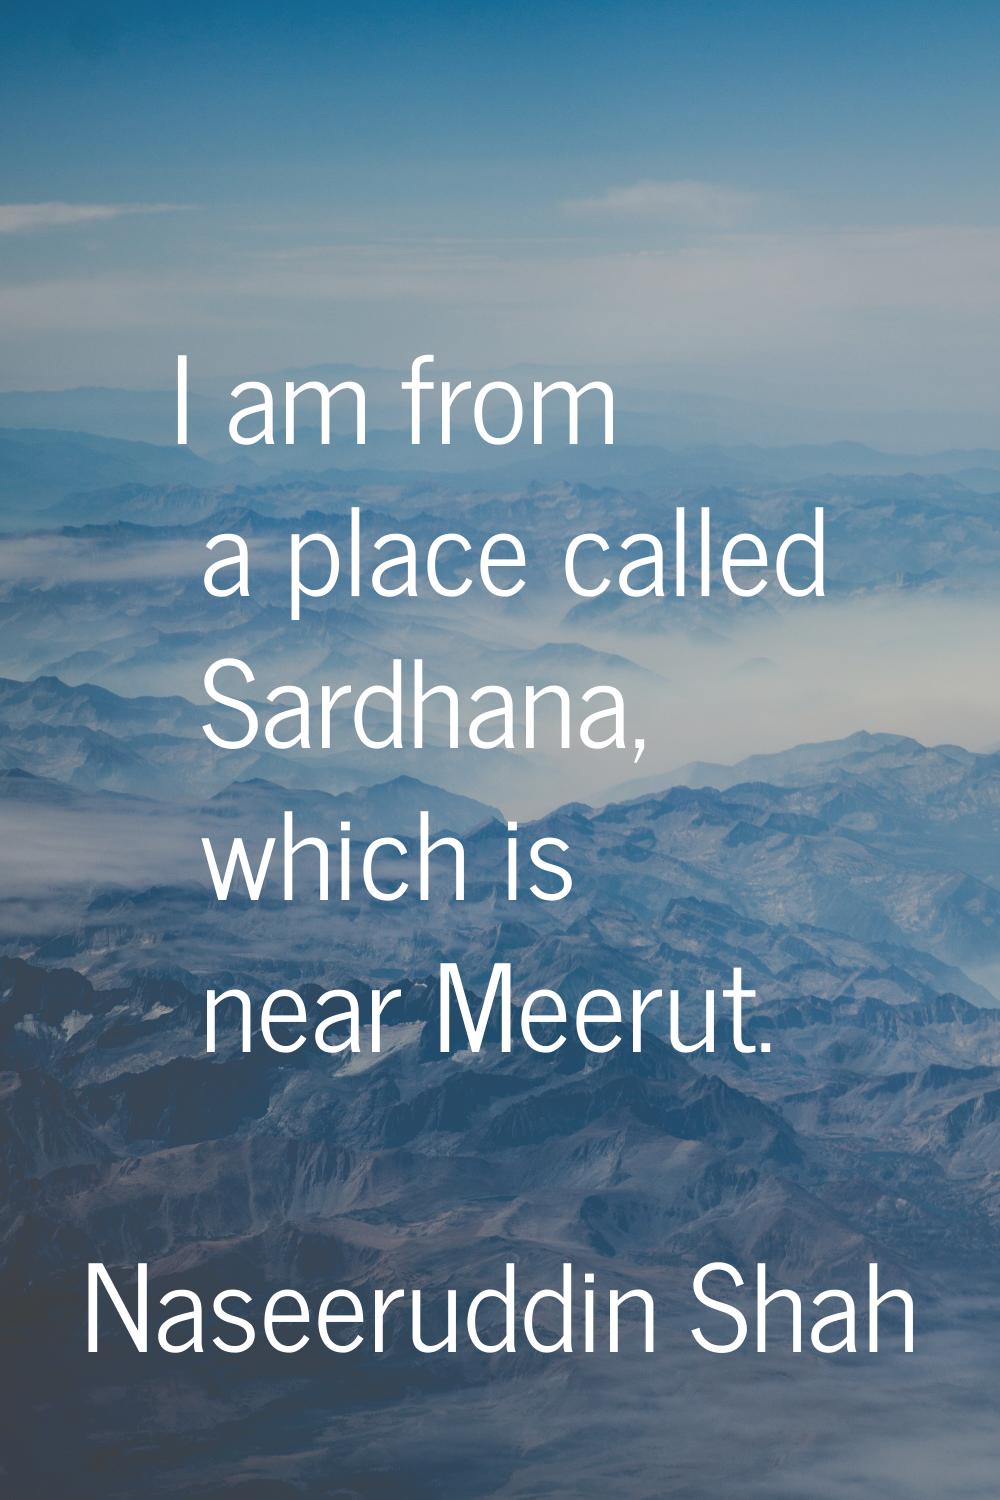 I am from a place called Sardhana, which is near Meerut.